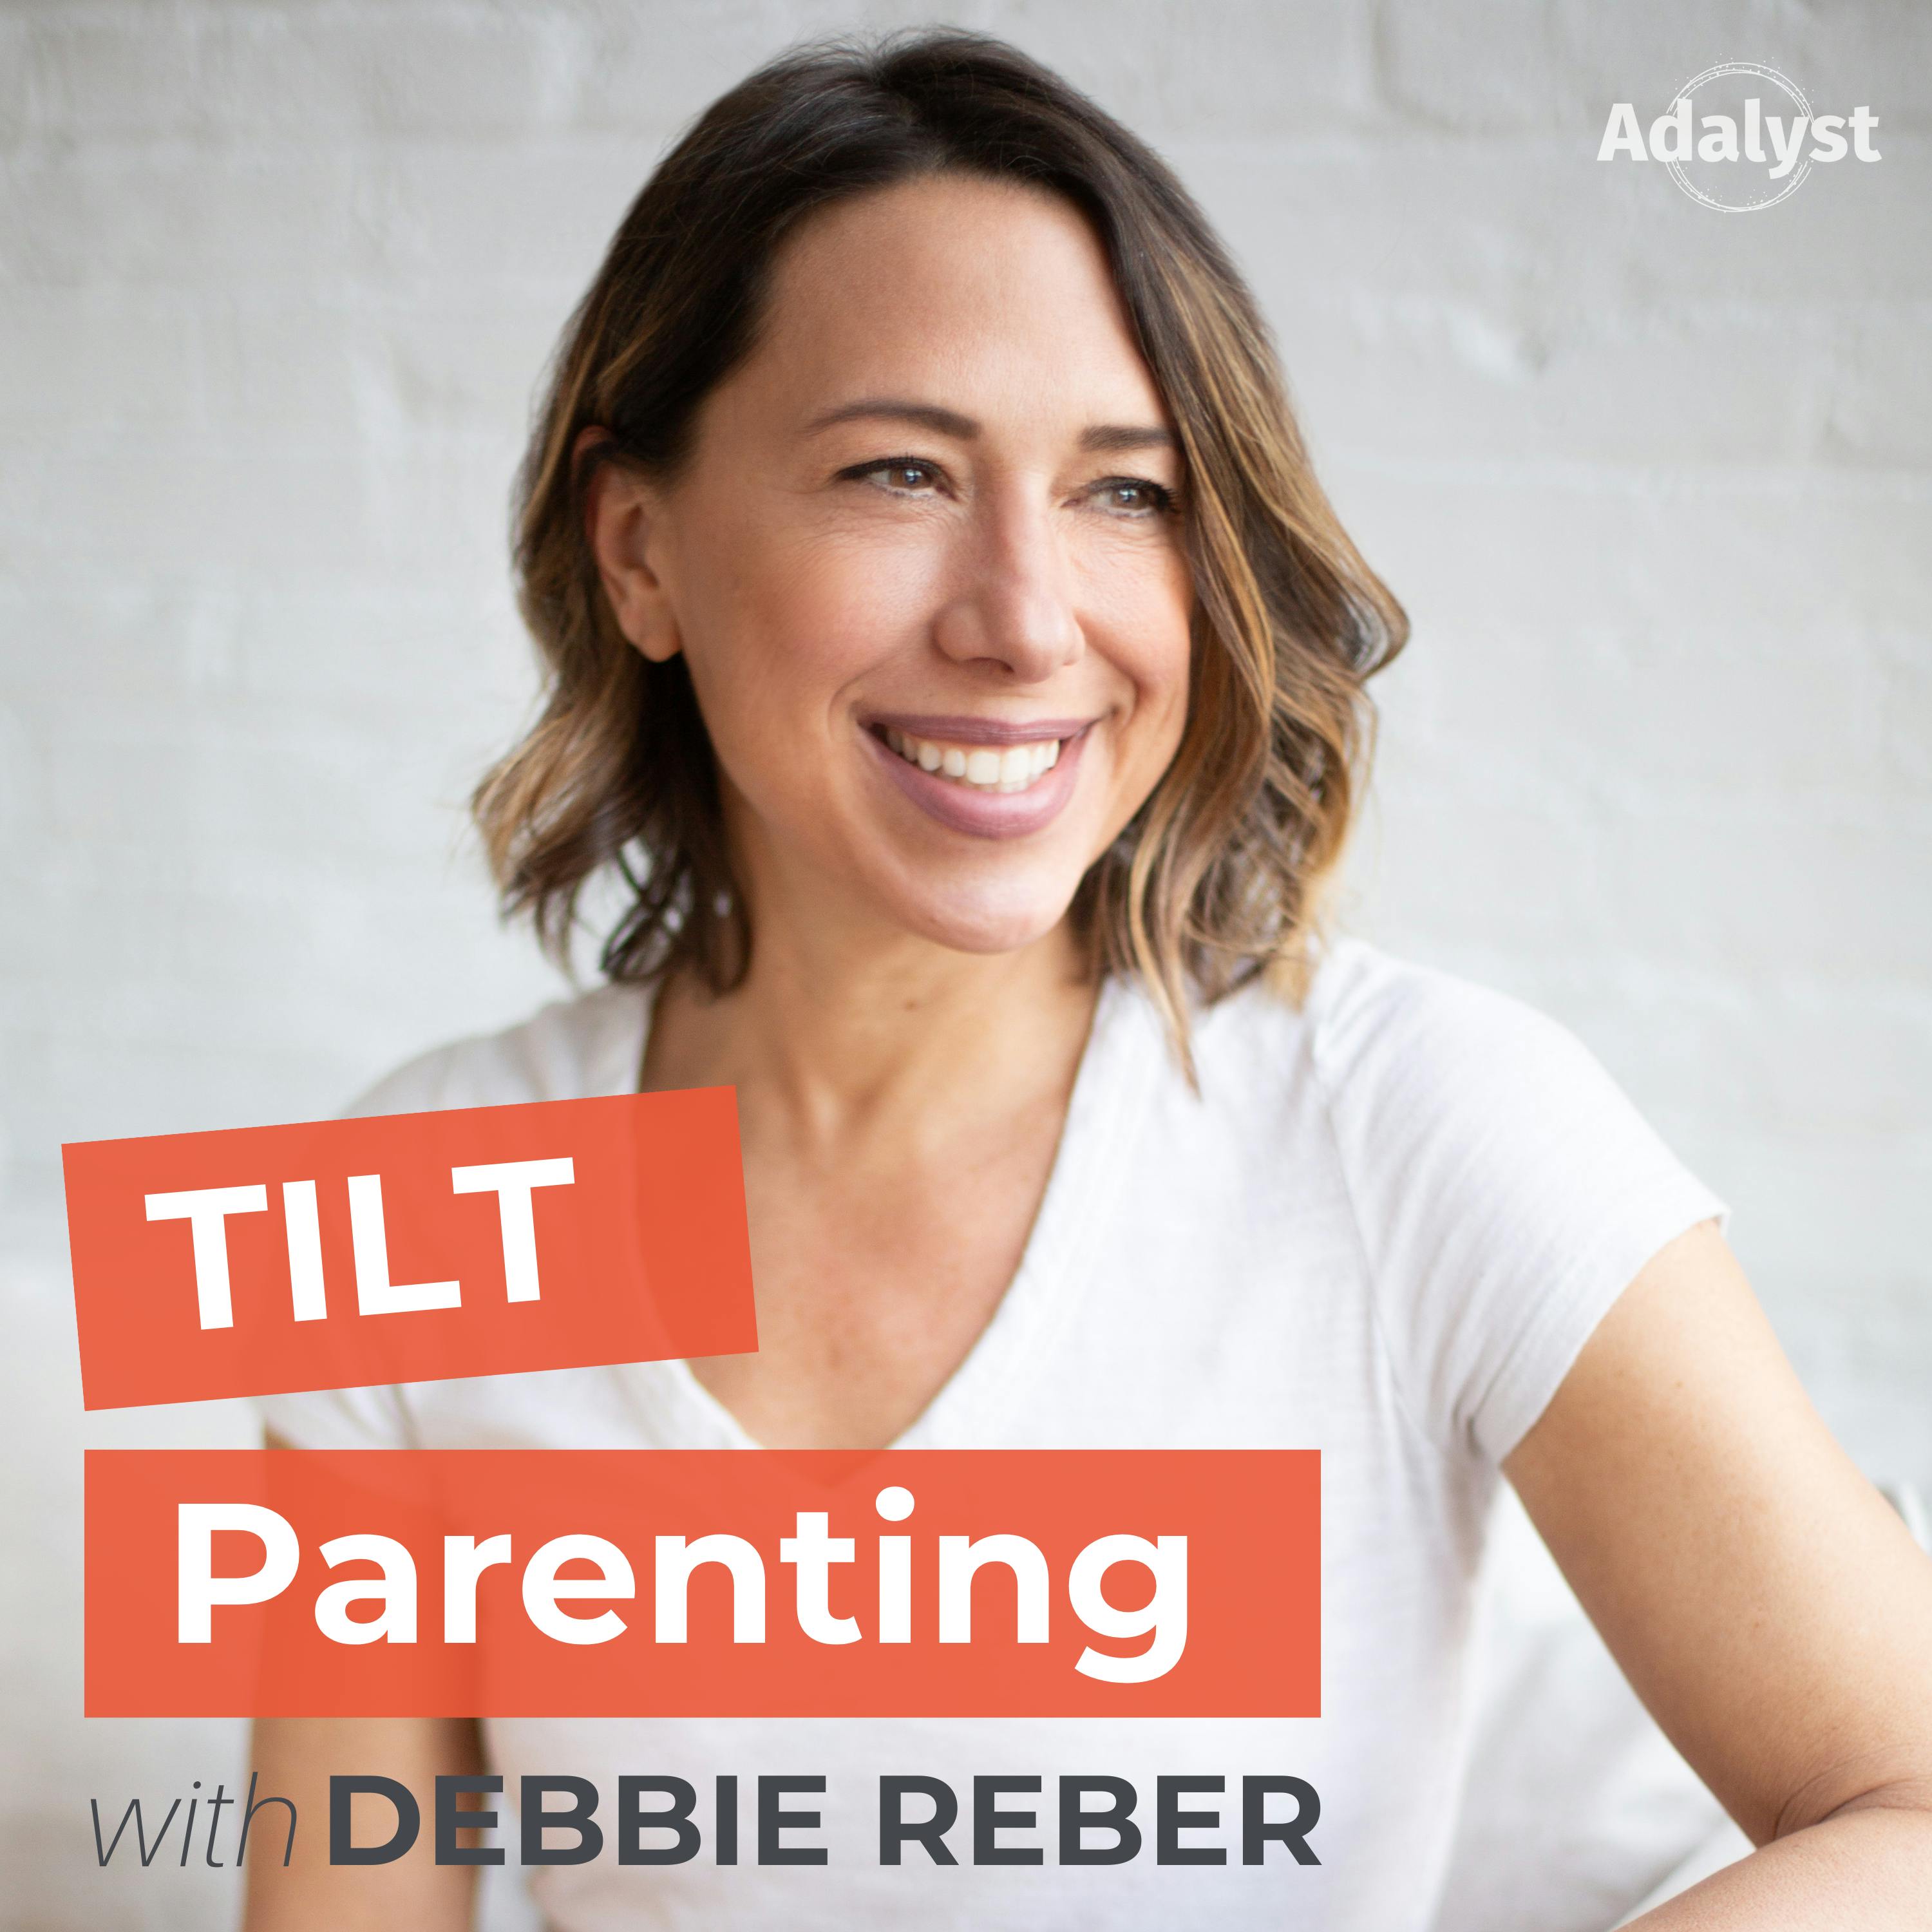 TPP 106a: Author and Parent Coach Julie King on Sibling Dynamics